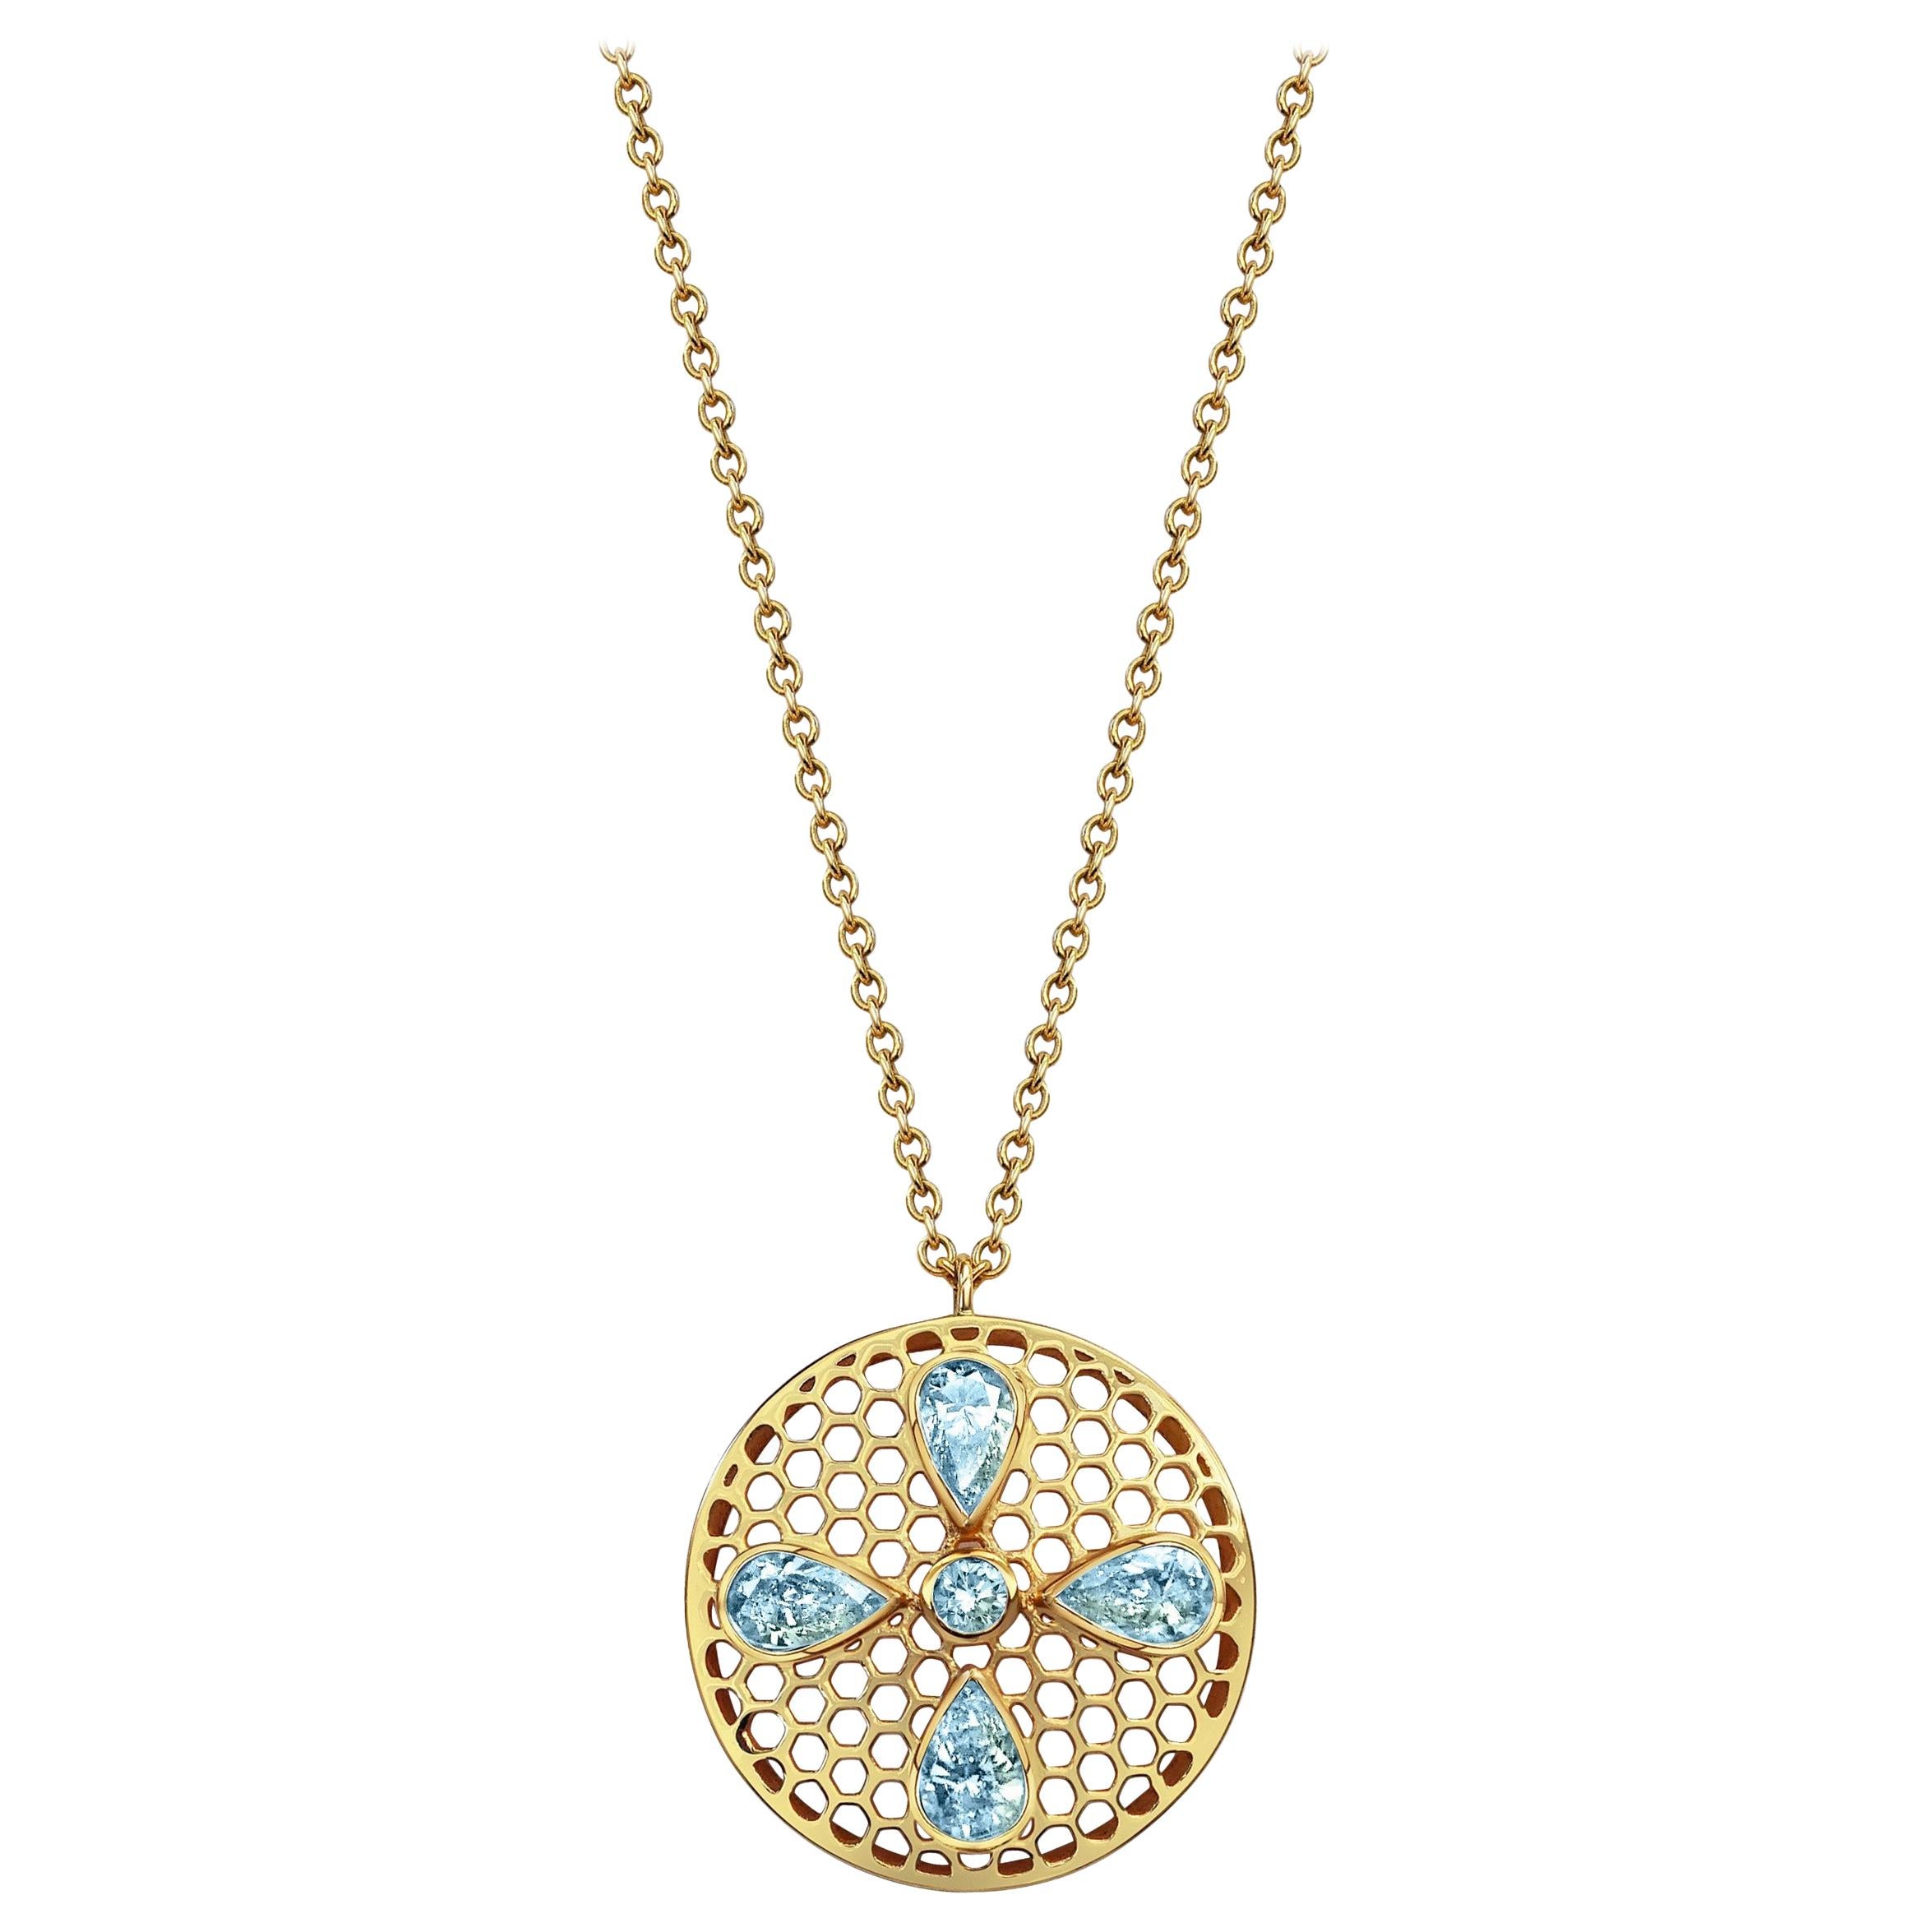 Handcrafted Aquamarines and 18 Karat Yellow Gold Pendant Necklace